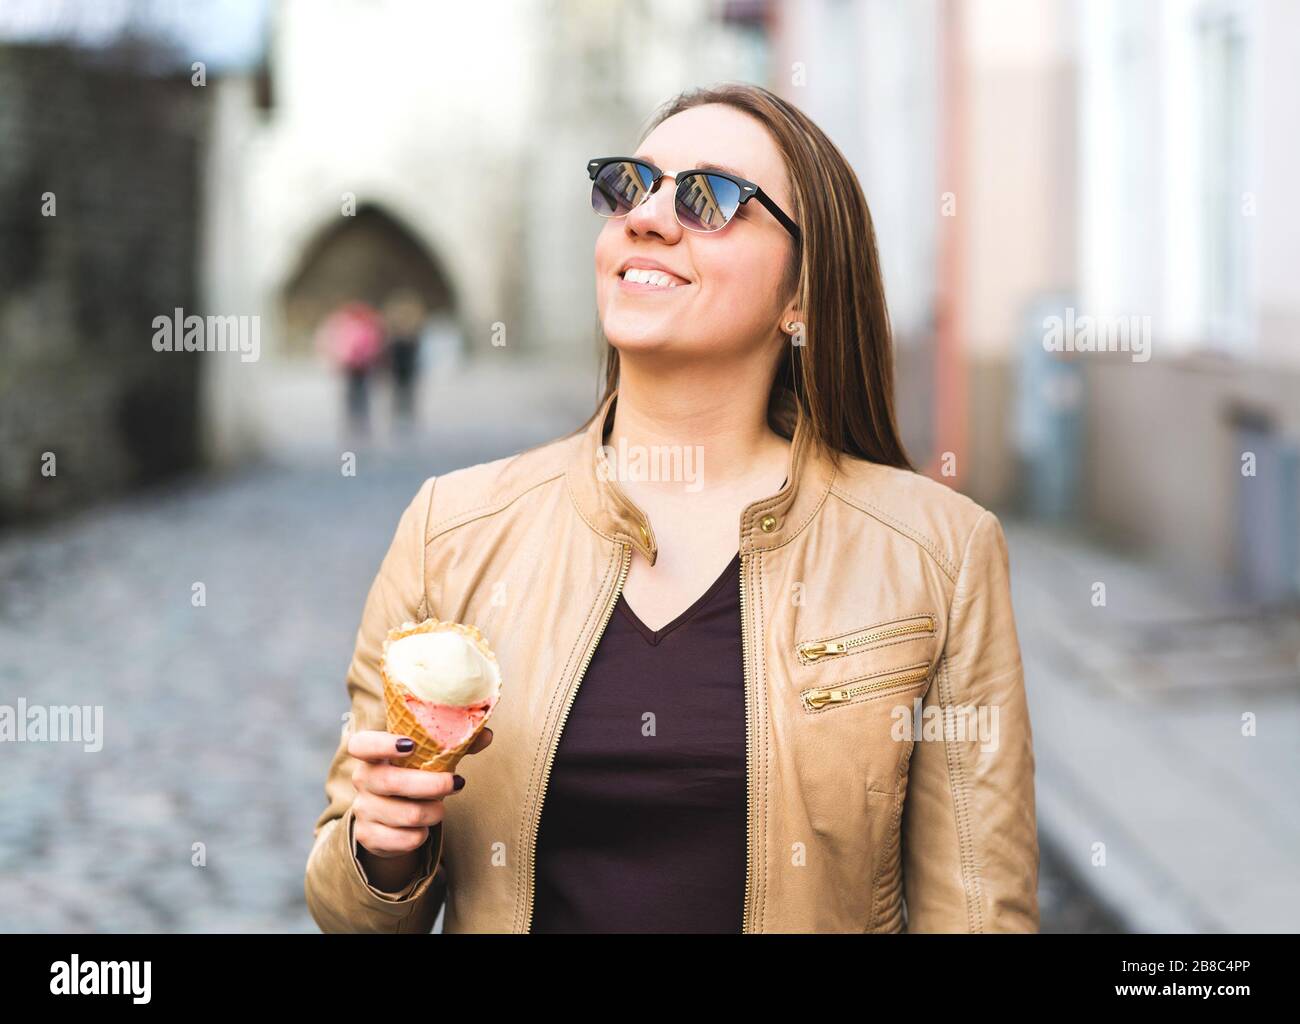 Happy woman eating and holding ice cream cone in city street. Smiling person enjoying her day off with delicious dessert. Stock Photo